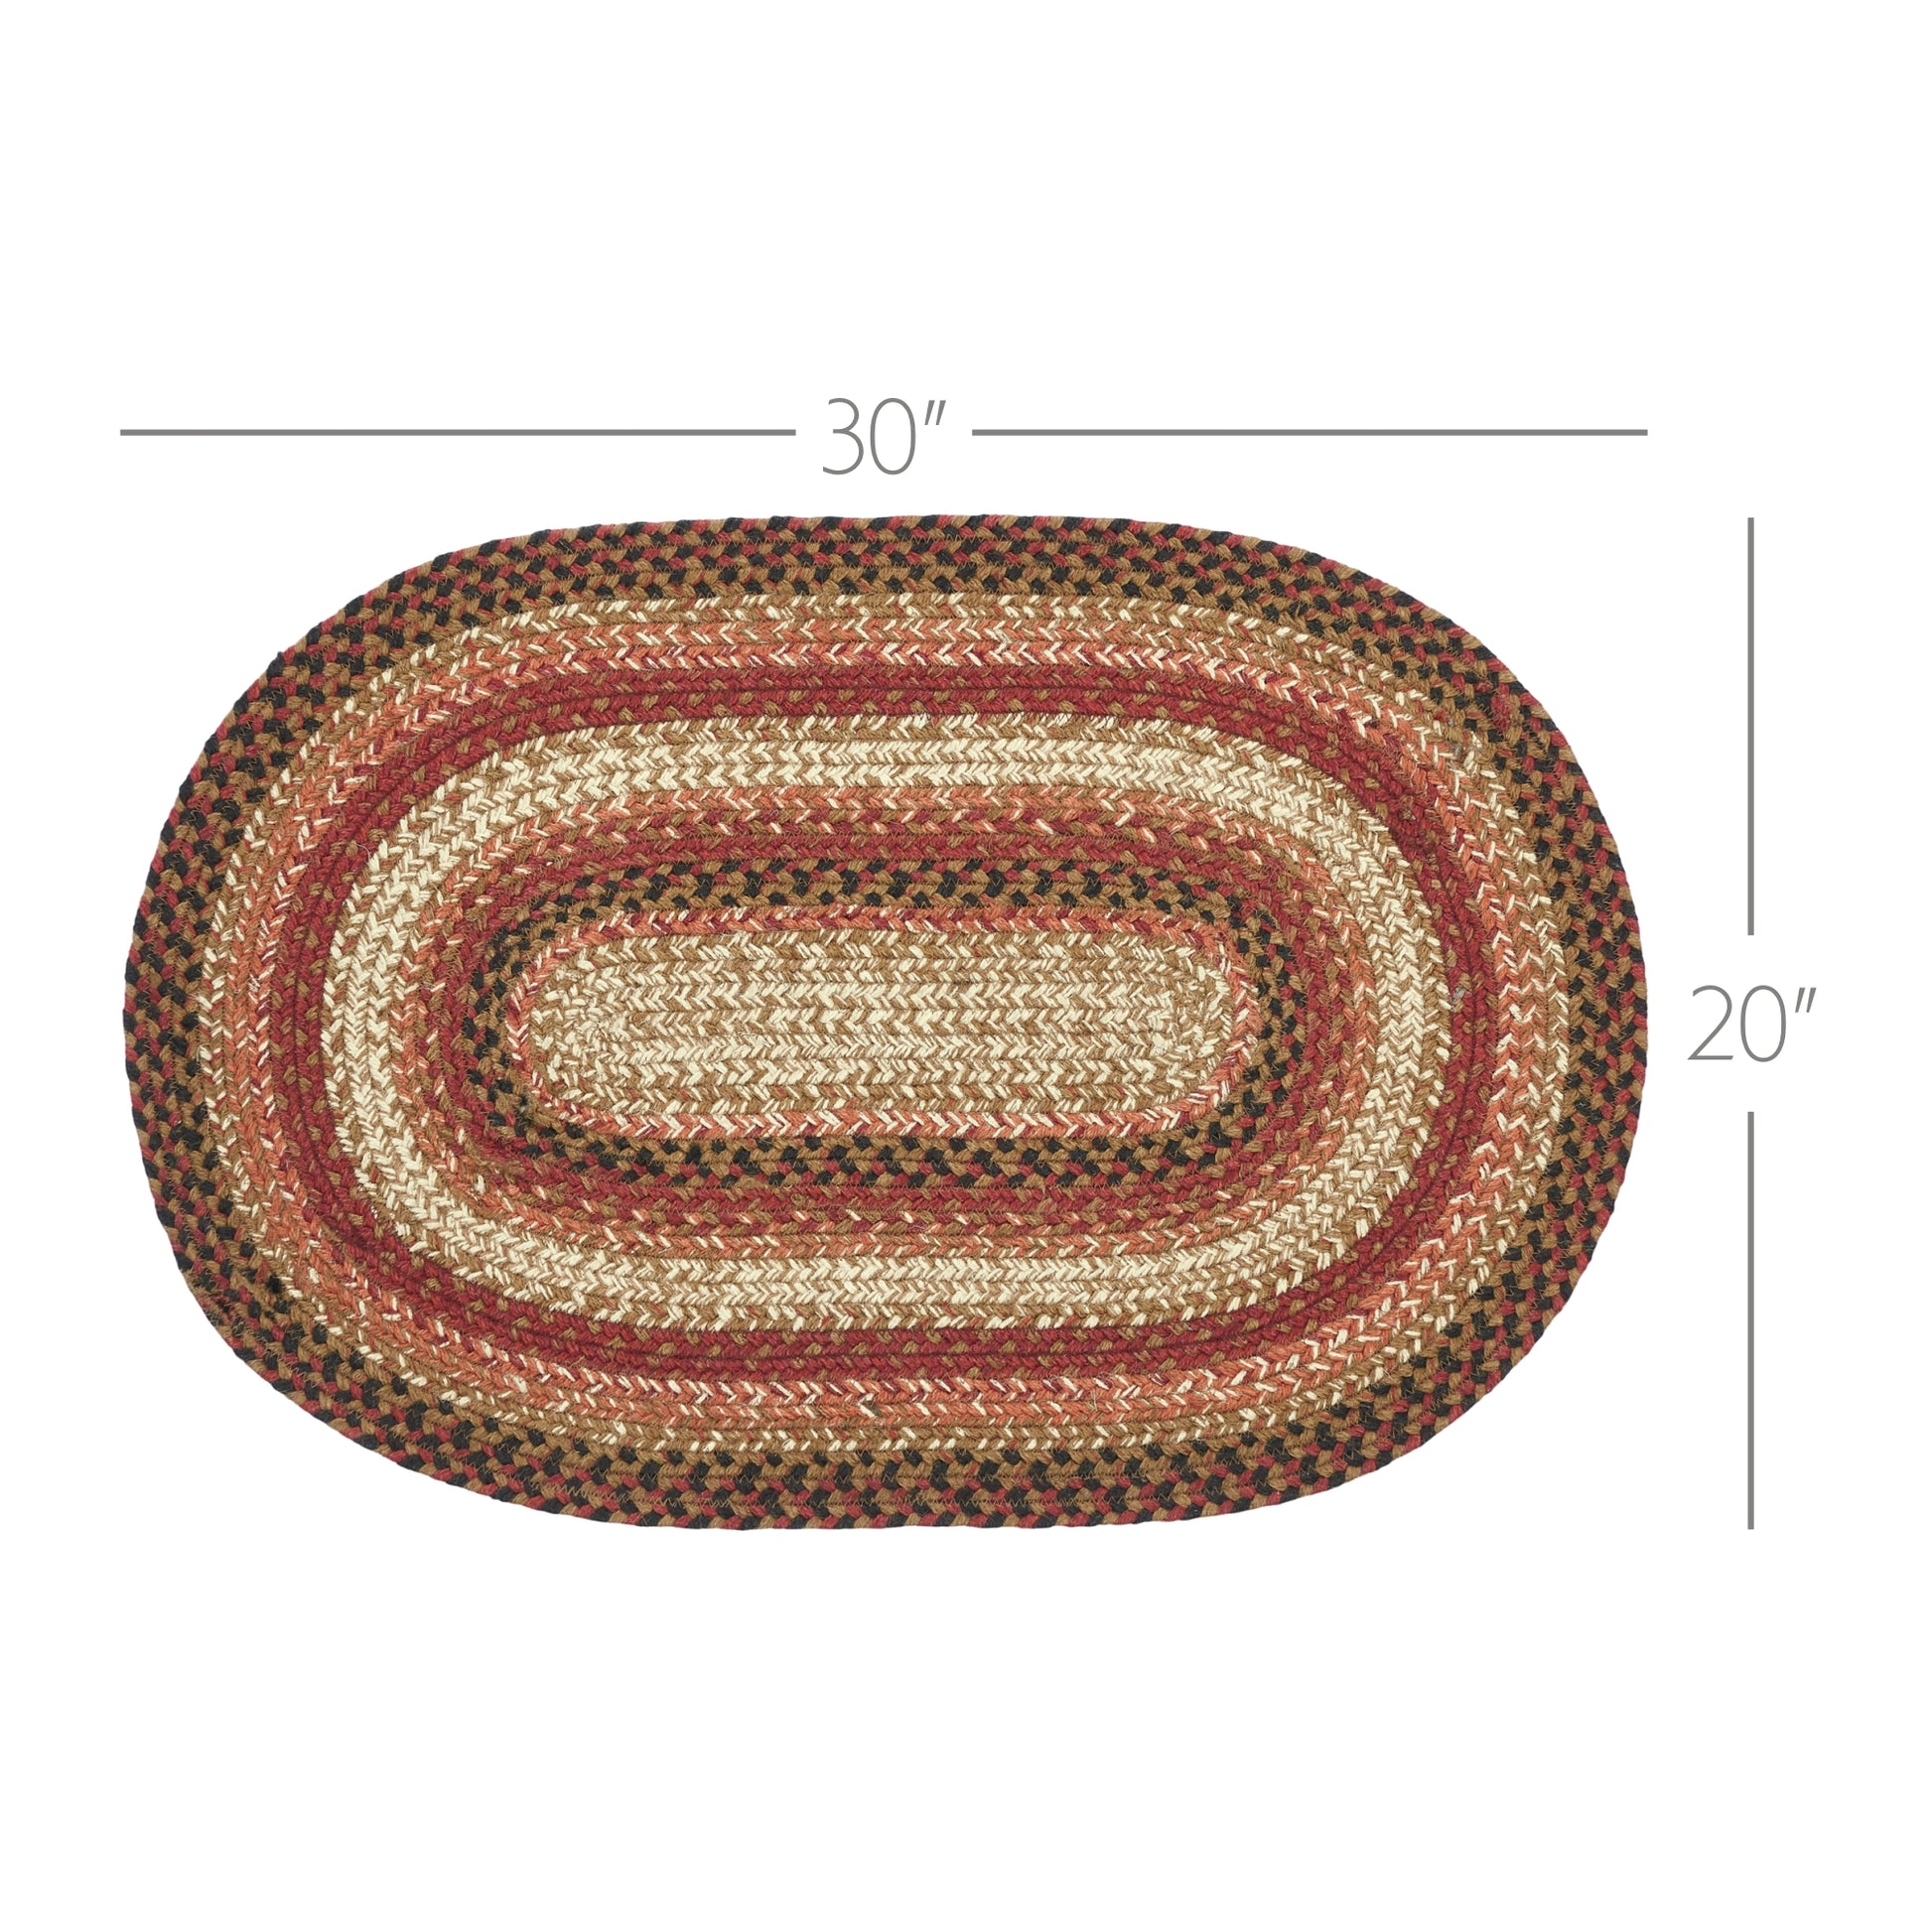 67110-Ginger-Spice-Jute-Rug-Oval-w-Pad-20x30-image-3